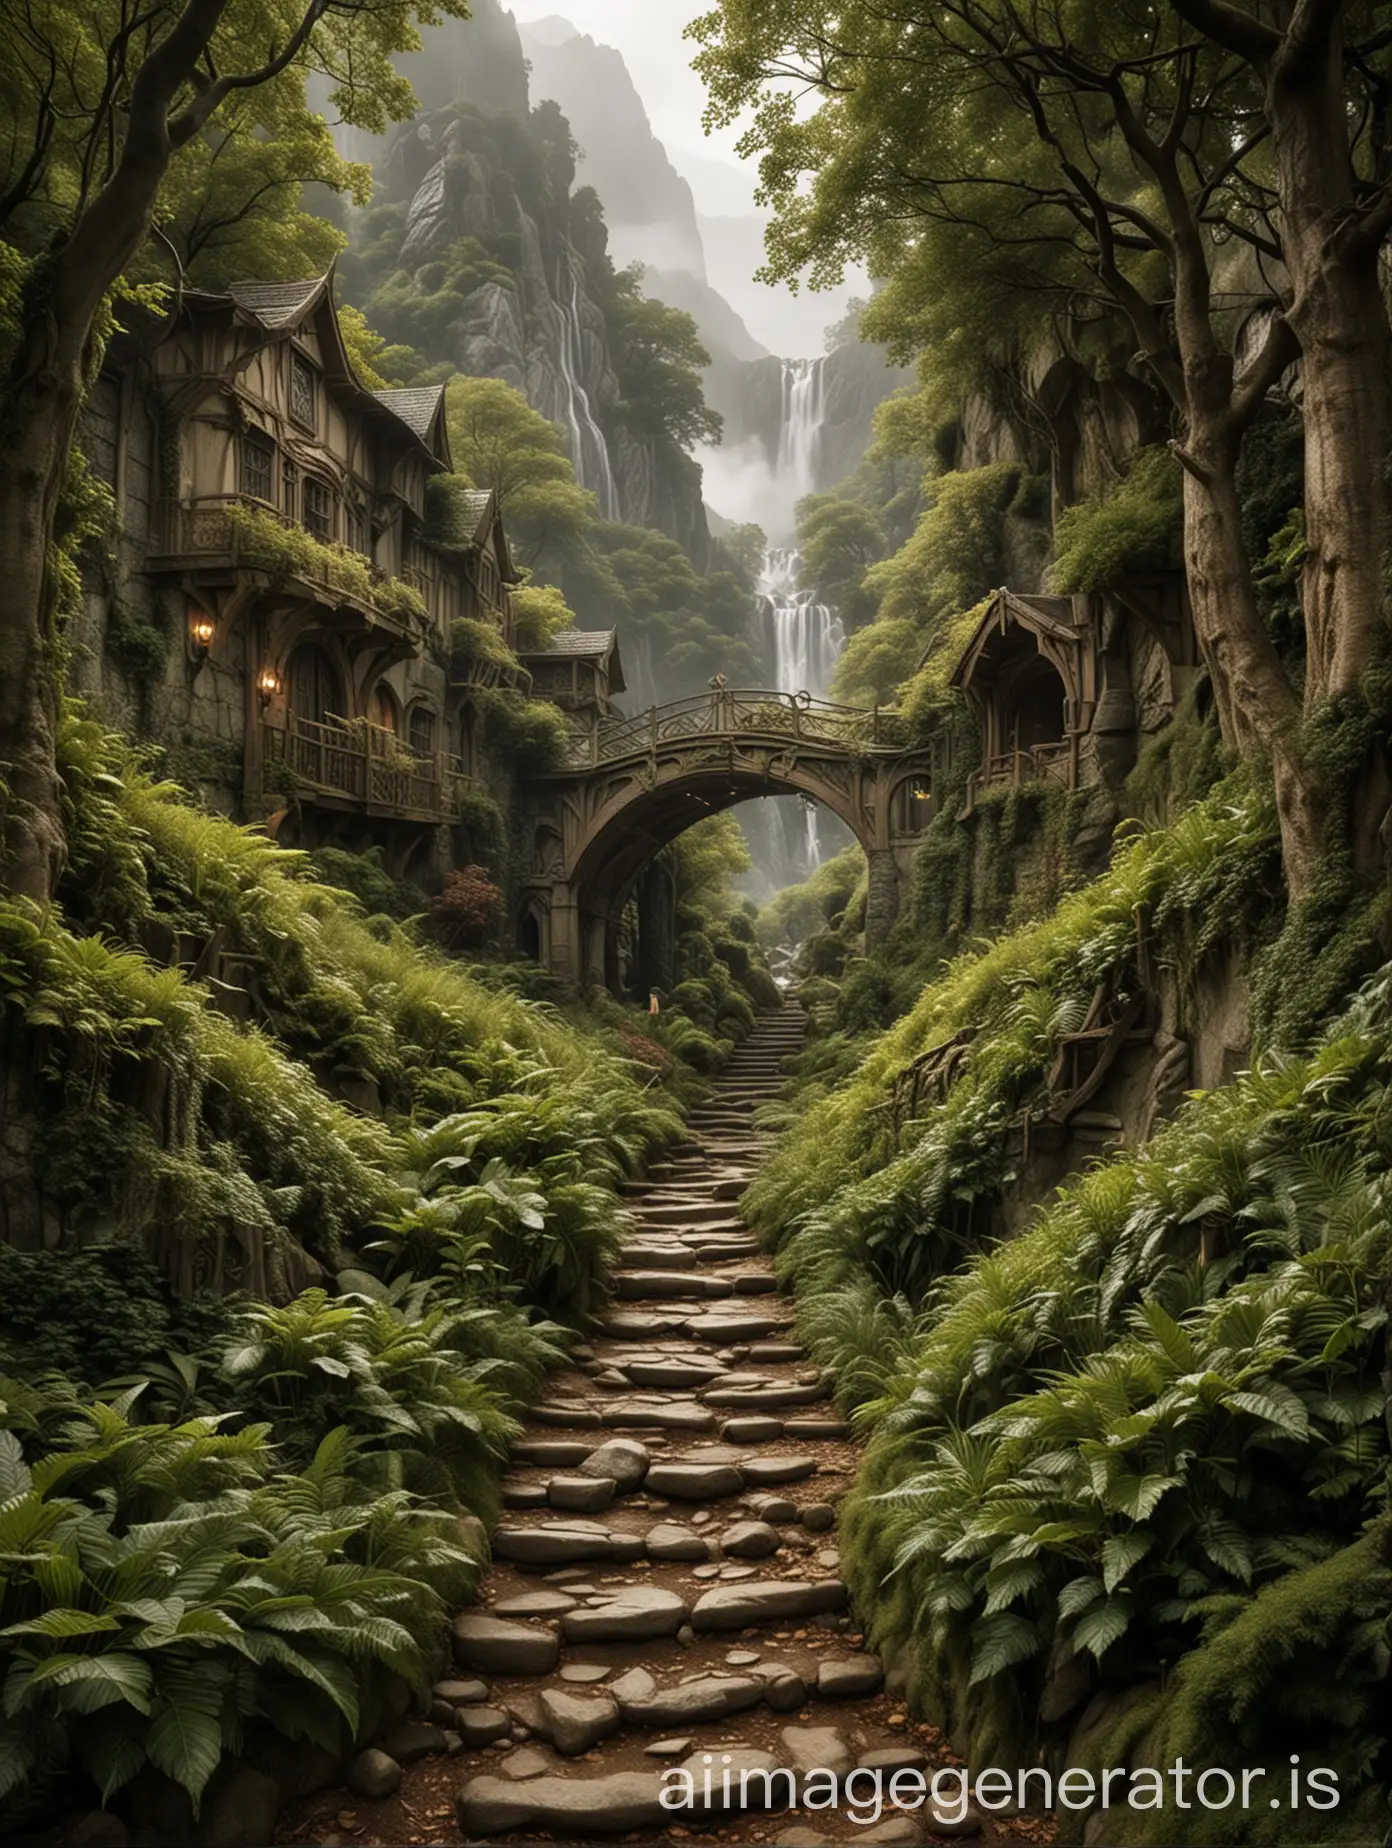 Rivendell located in a hidden valley in the Misty Mountains, surrounded by dense forest and great mountains. Access to this valley is through a winding and hard-to-find path, making it a secluded place from outside threats